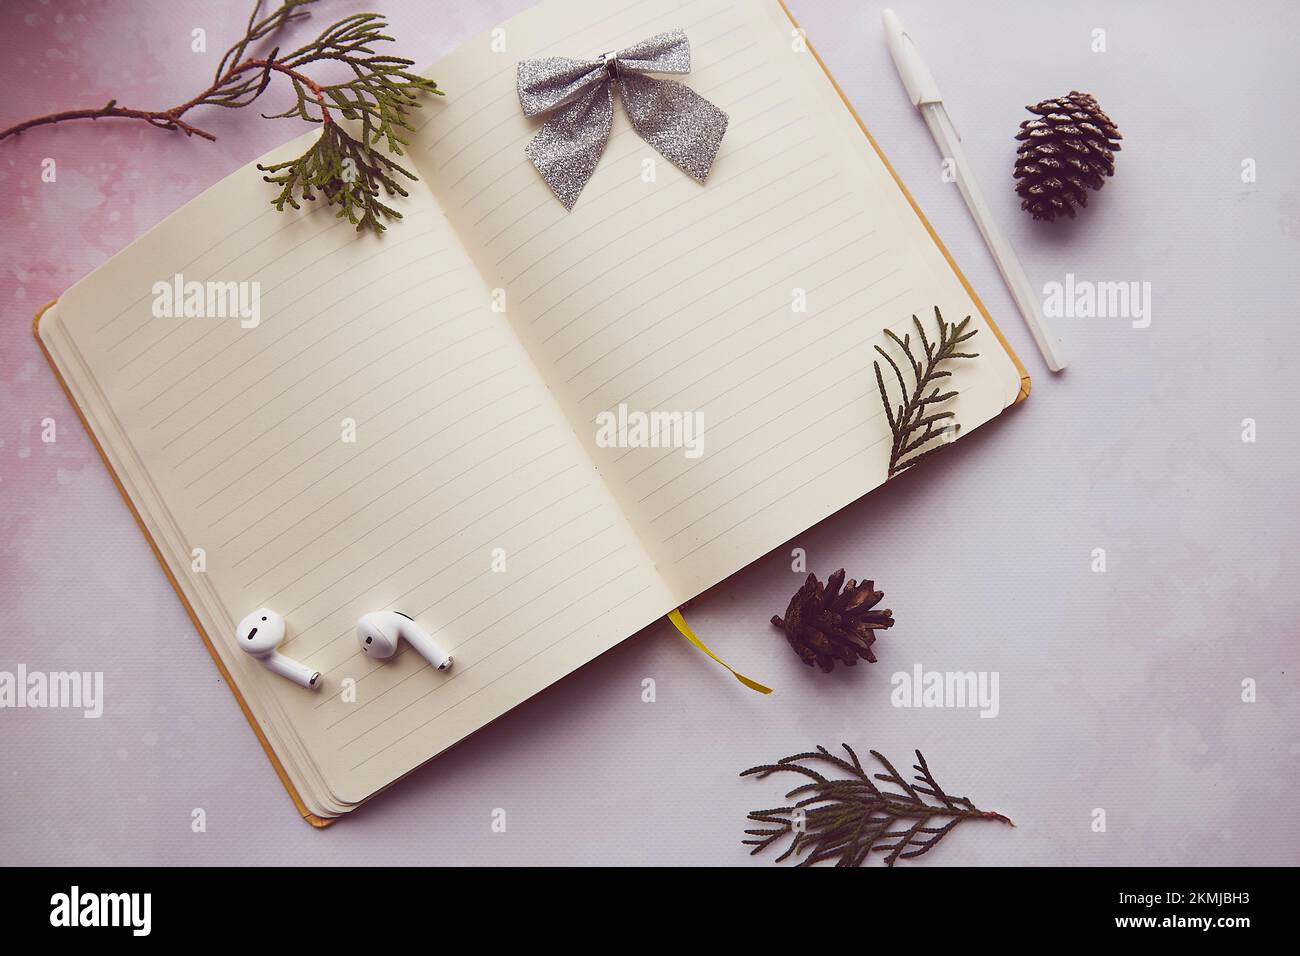 Seasonal vintage notepad mock up with winter decorations, earphones. New year resolution, new start and list of goals lifestyle. Stock Photo